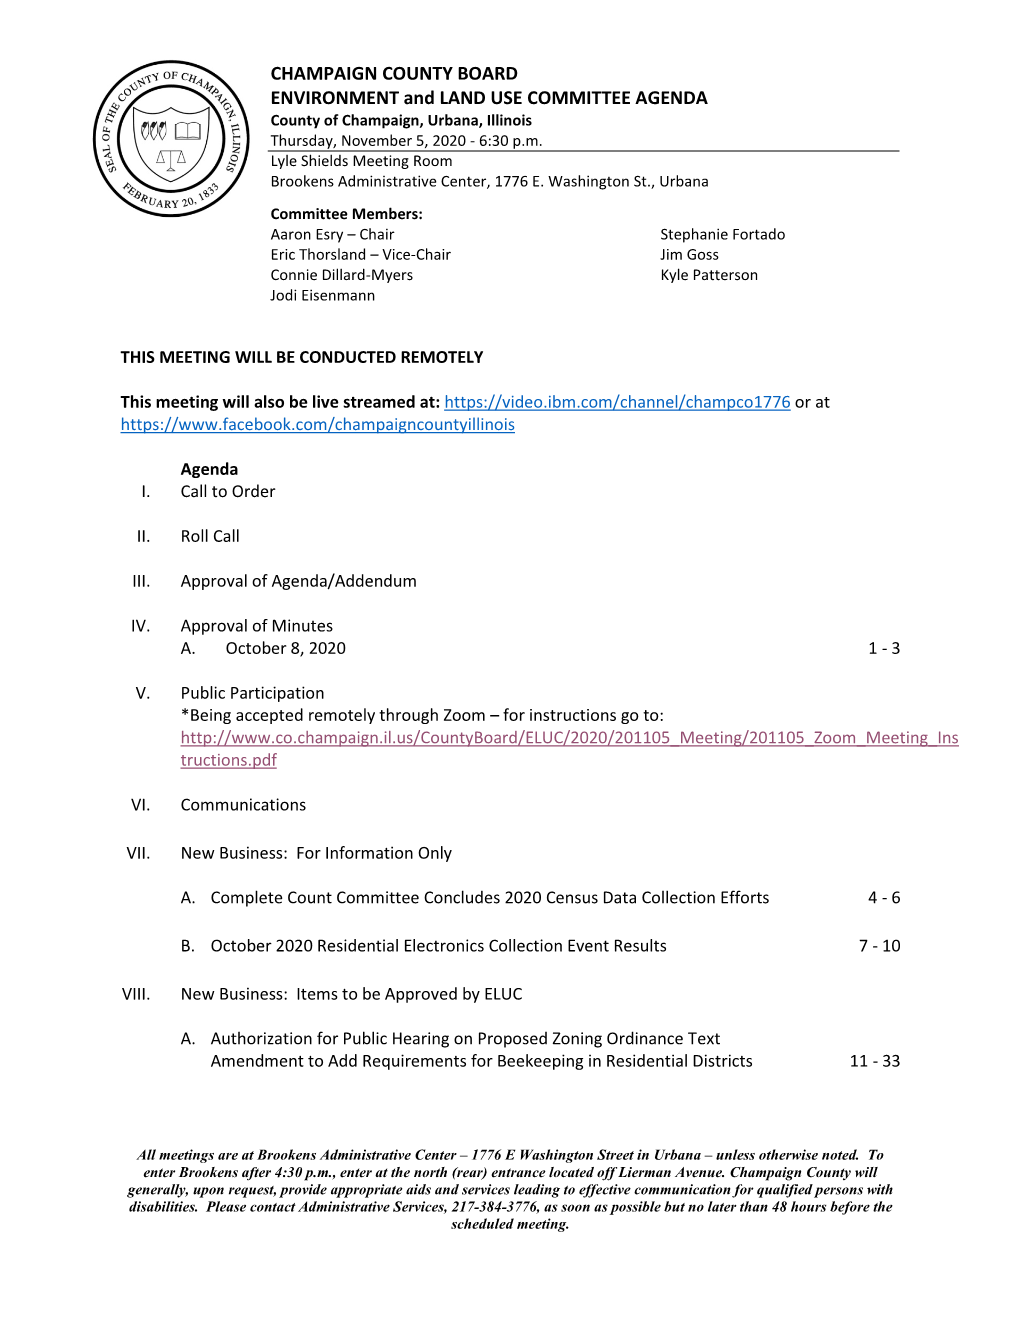 ENVIRONMENT and LAND USE COMMITTEE AGENDA County of Champaign, Urbana, Illinois Thursday, November 5, 2020 - 6:30 P.M